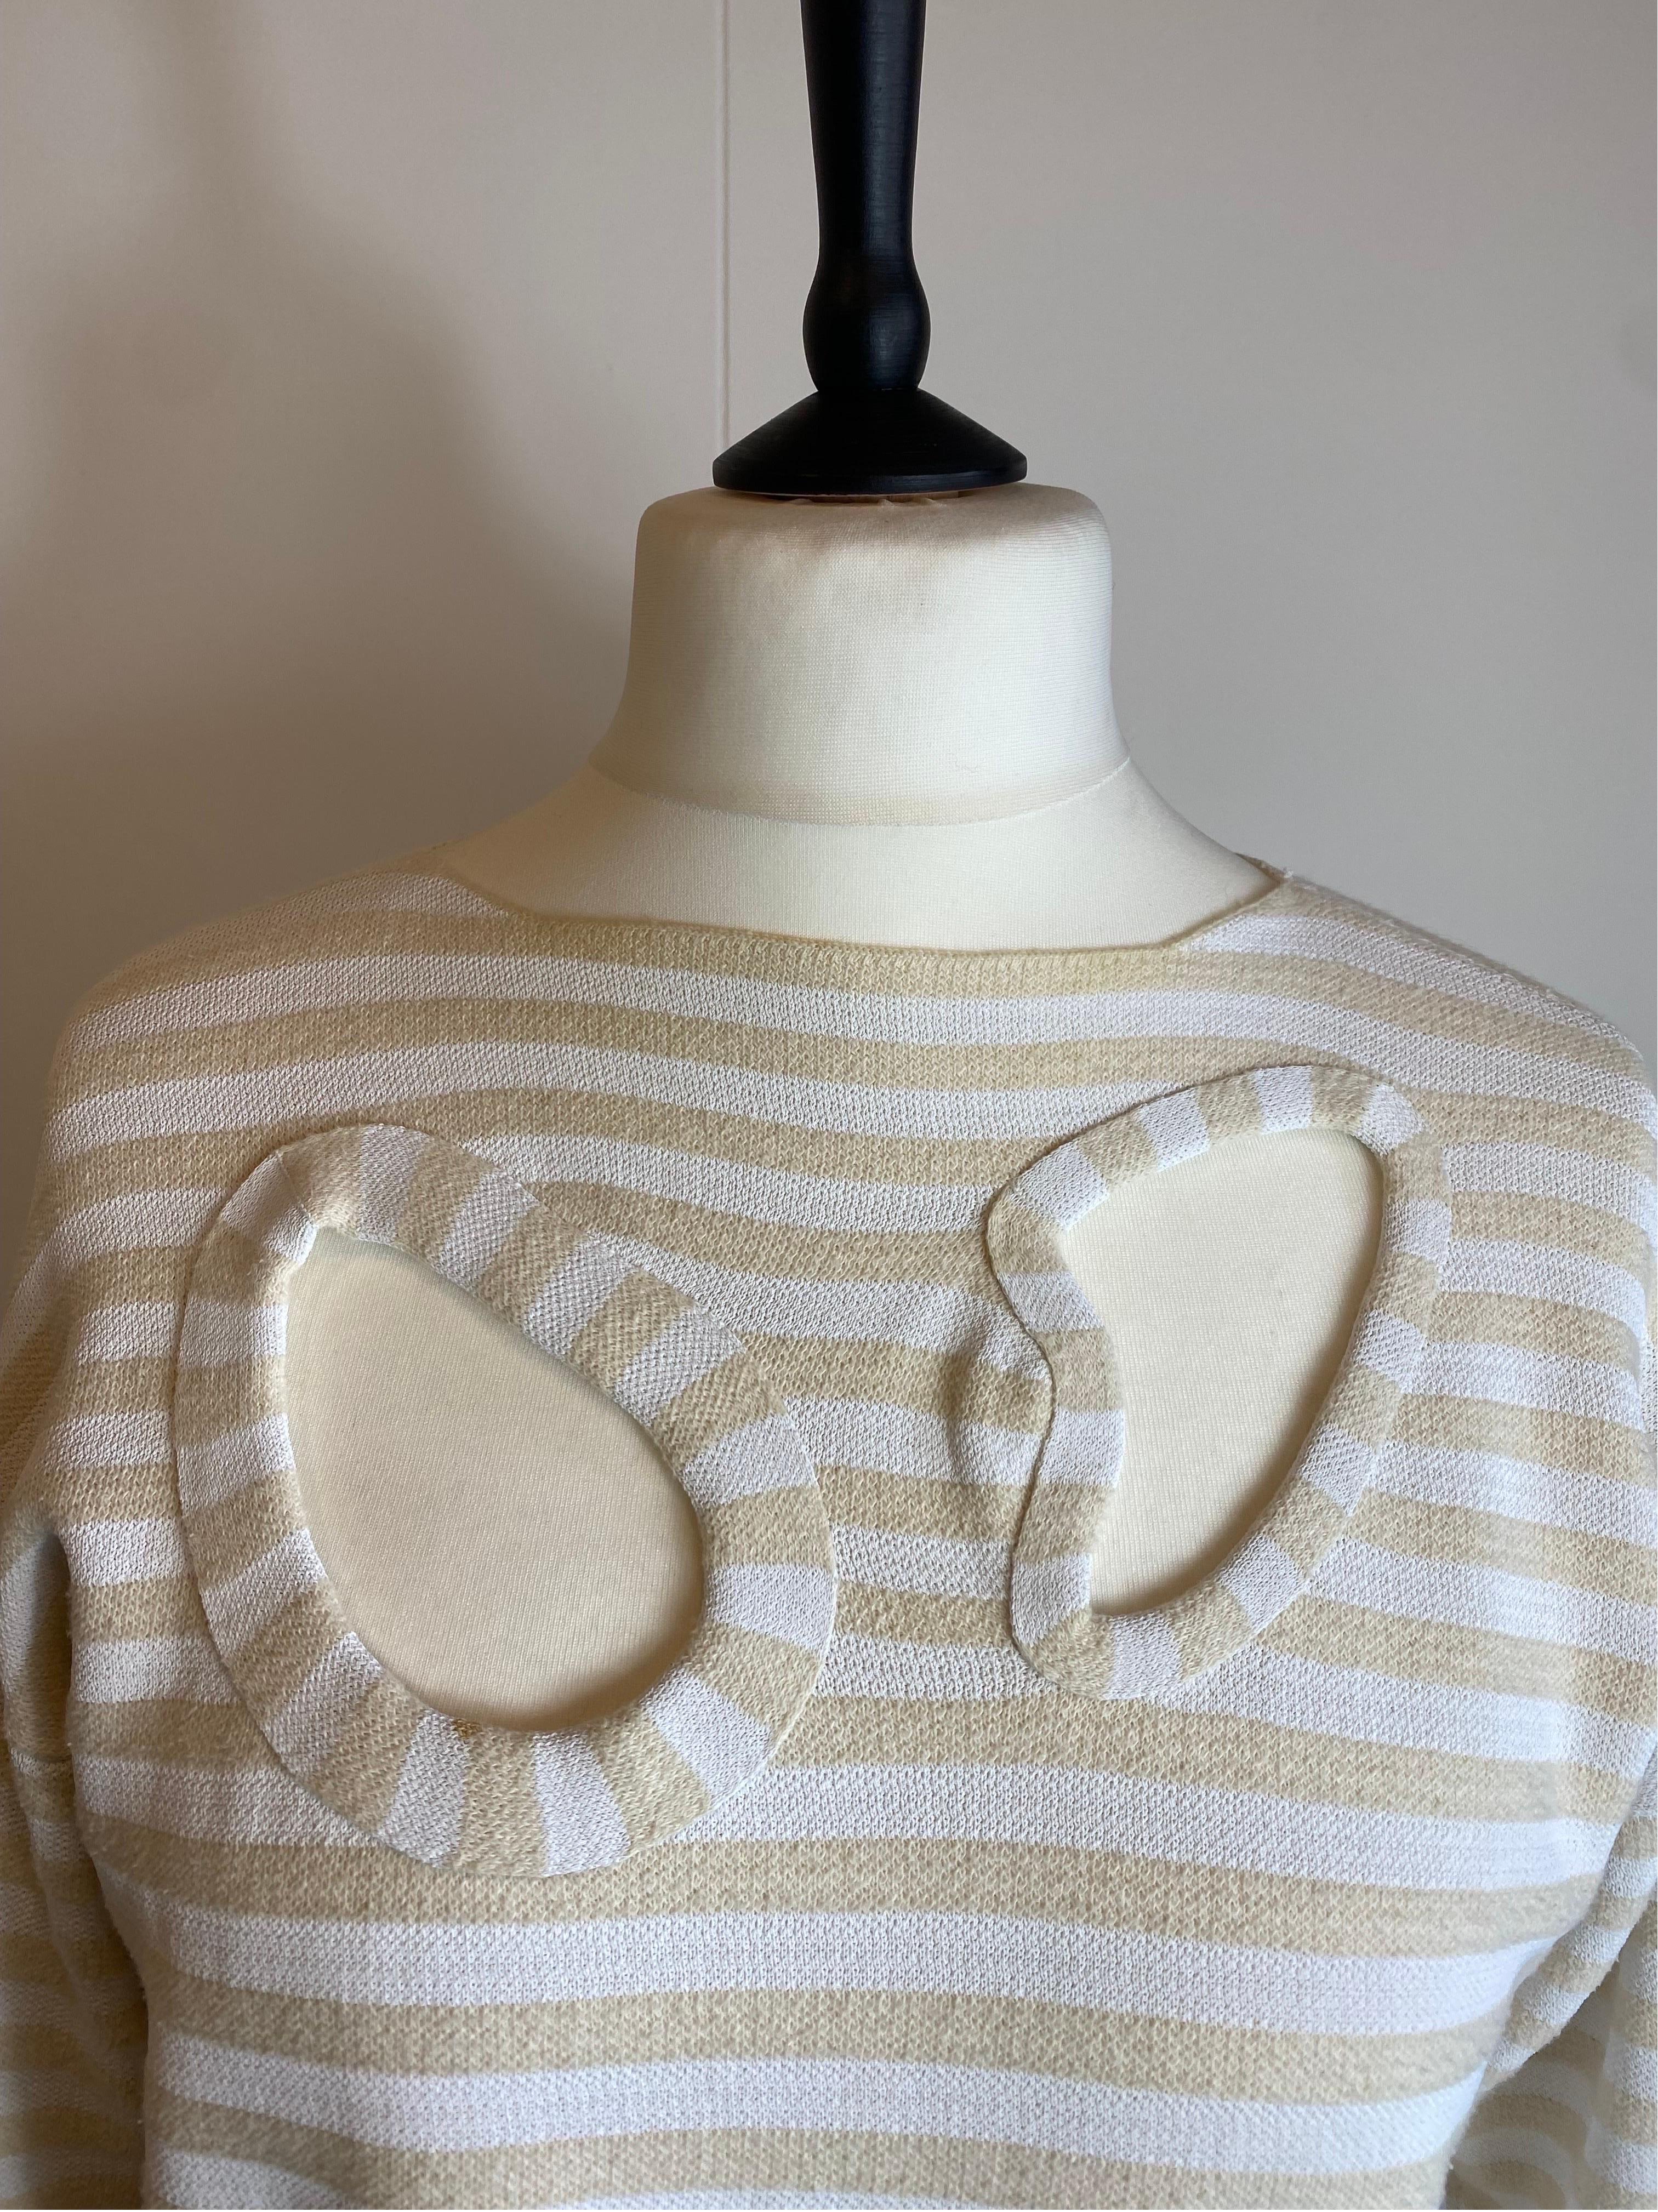 Celine sweater.
In viscose, cotton and polyester.
International size S. Fits larger.
Shoulders 46 cm
Bust 54 cm
Length 60 cm
Sleeve 68 cm
In good general condition, it has some small spots as shown in the photos.